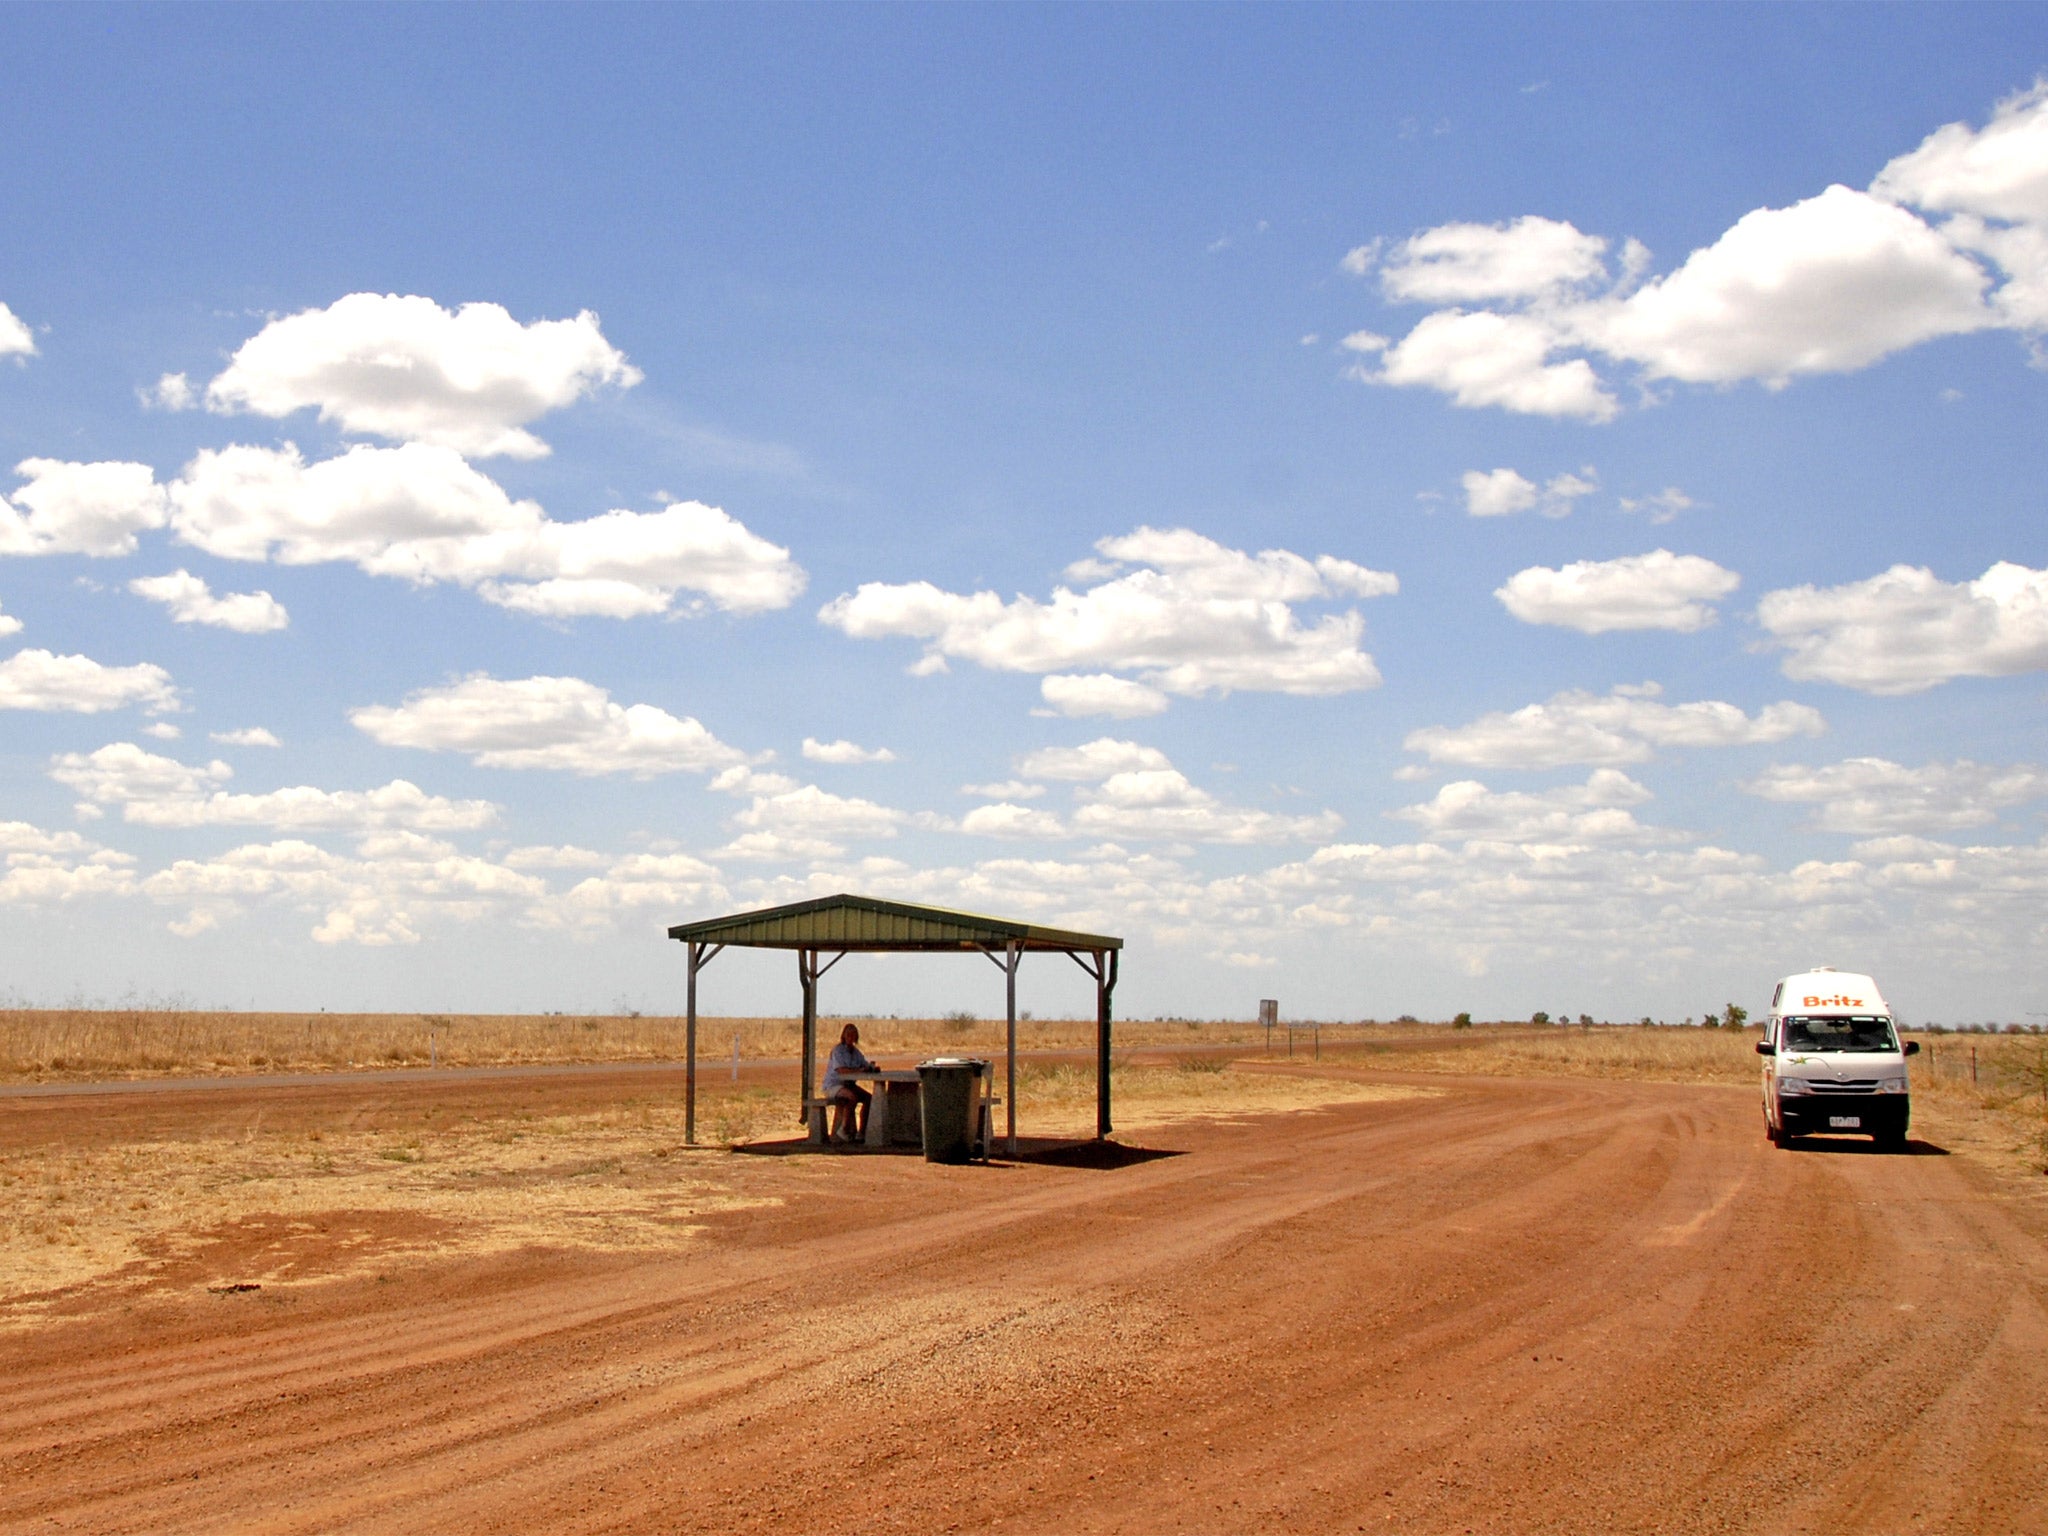 The parched flatlands near Cloncurry in Queensland